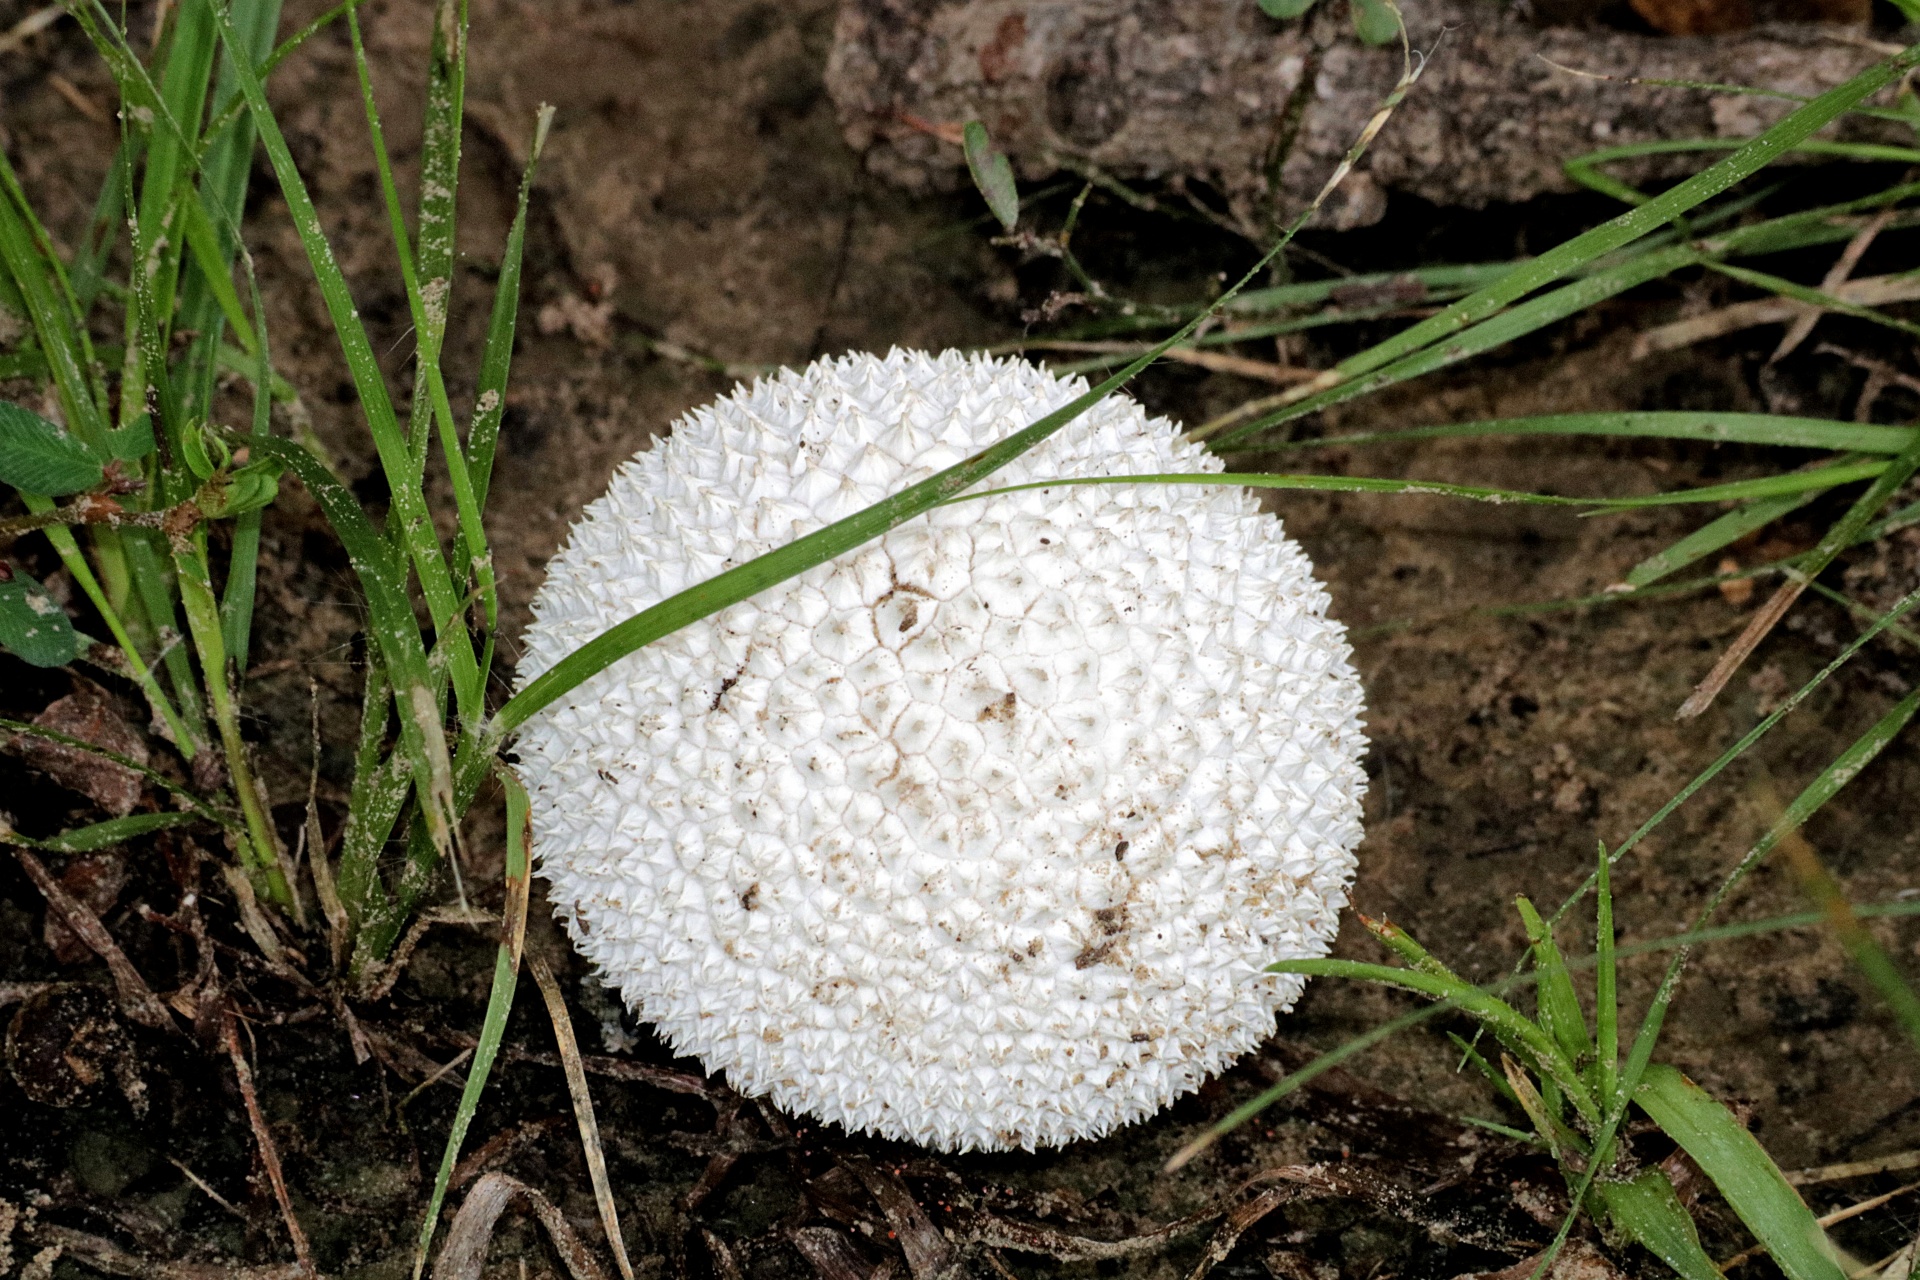 Close-up of a white spiny puffball mushroom.